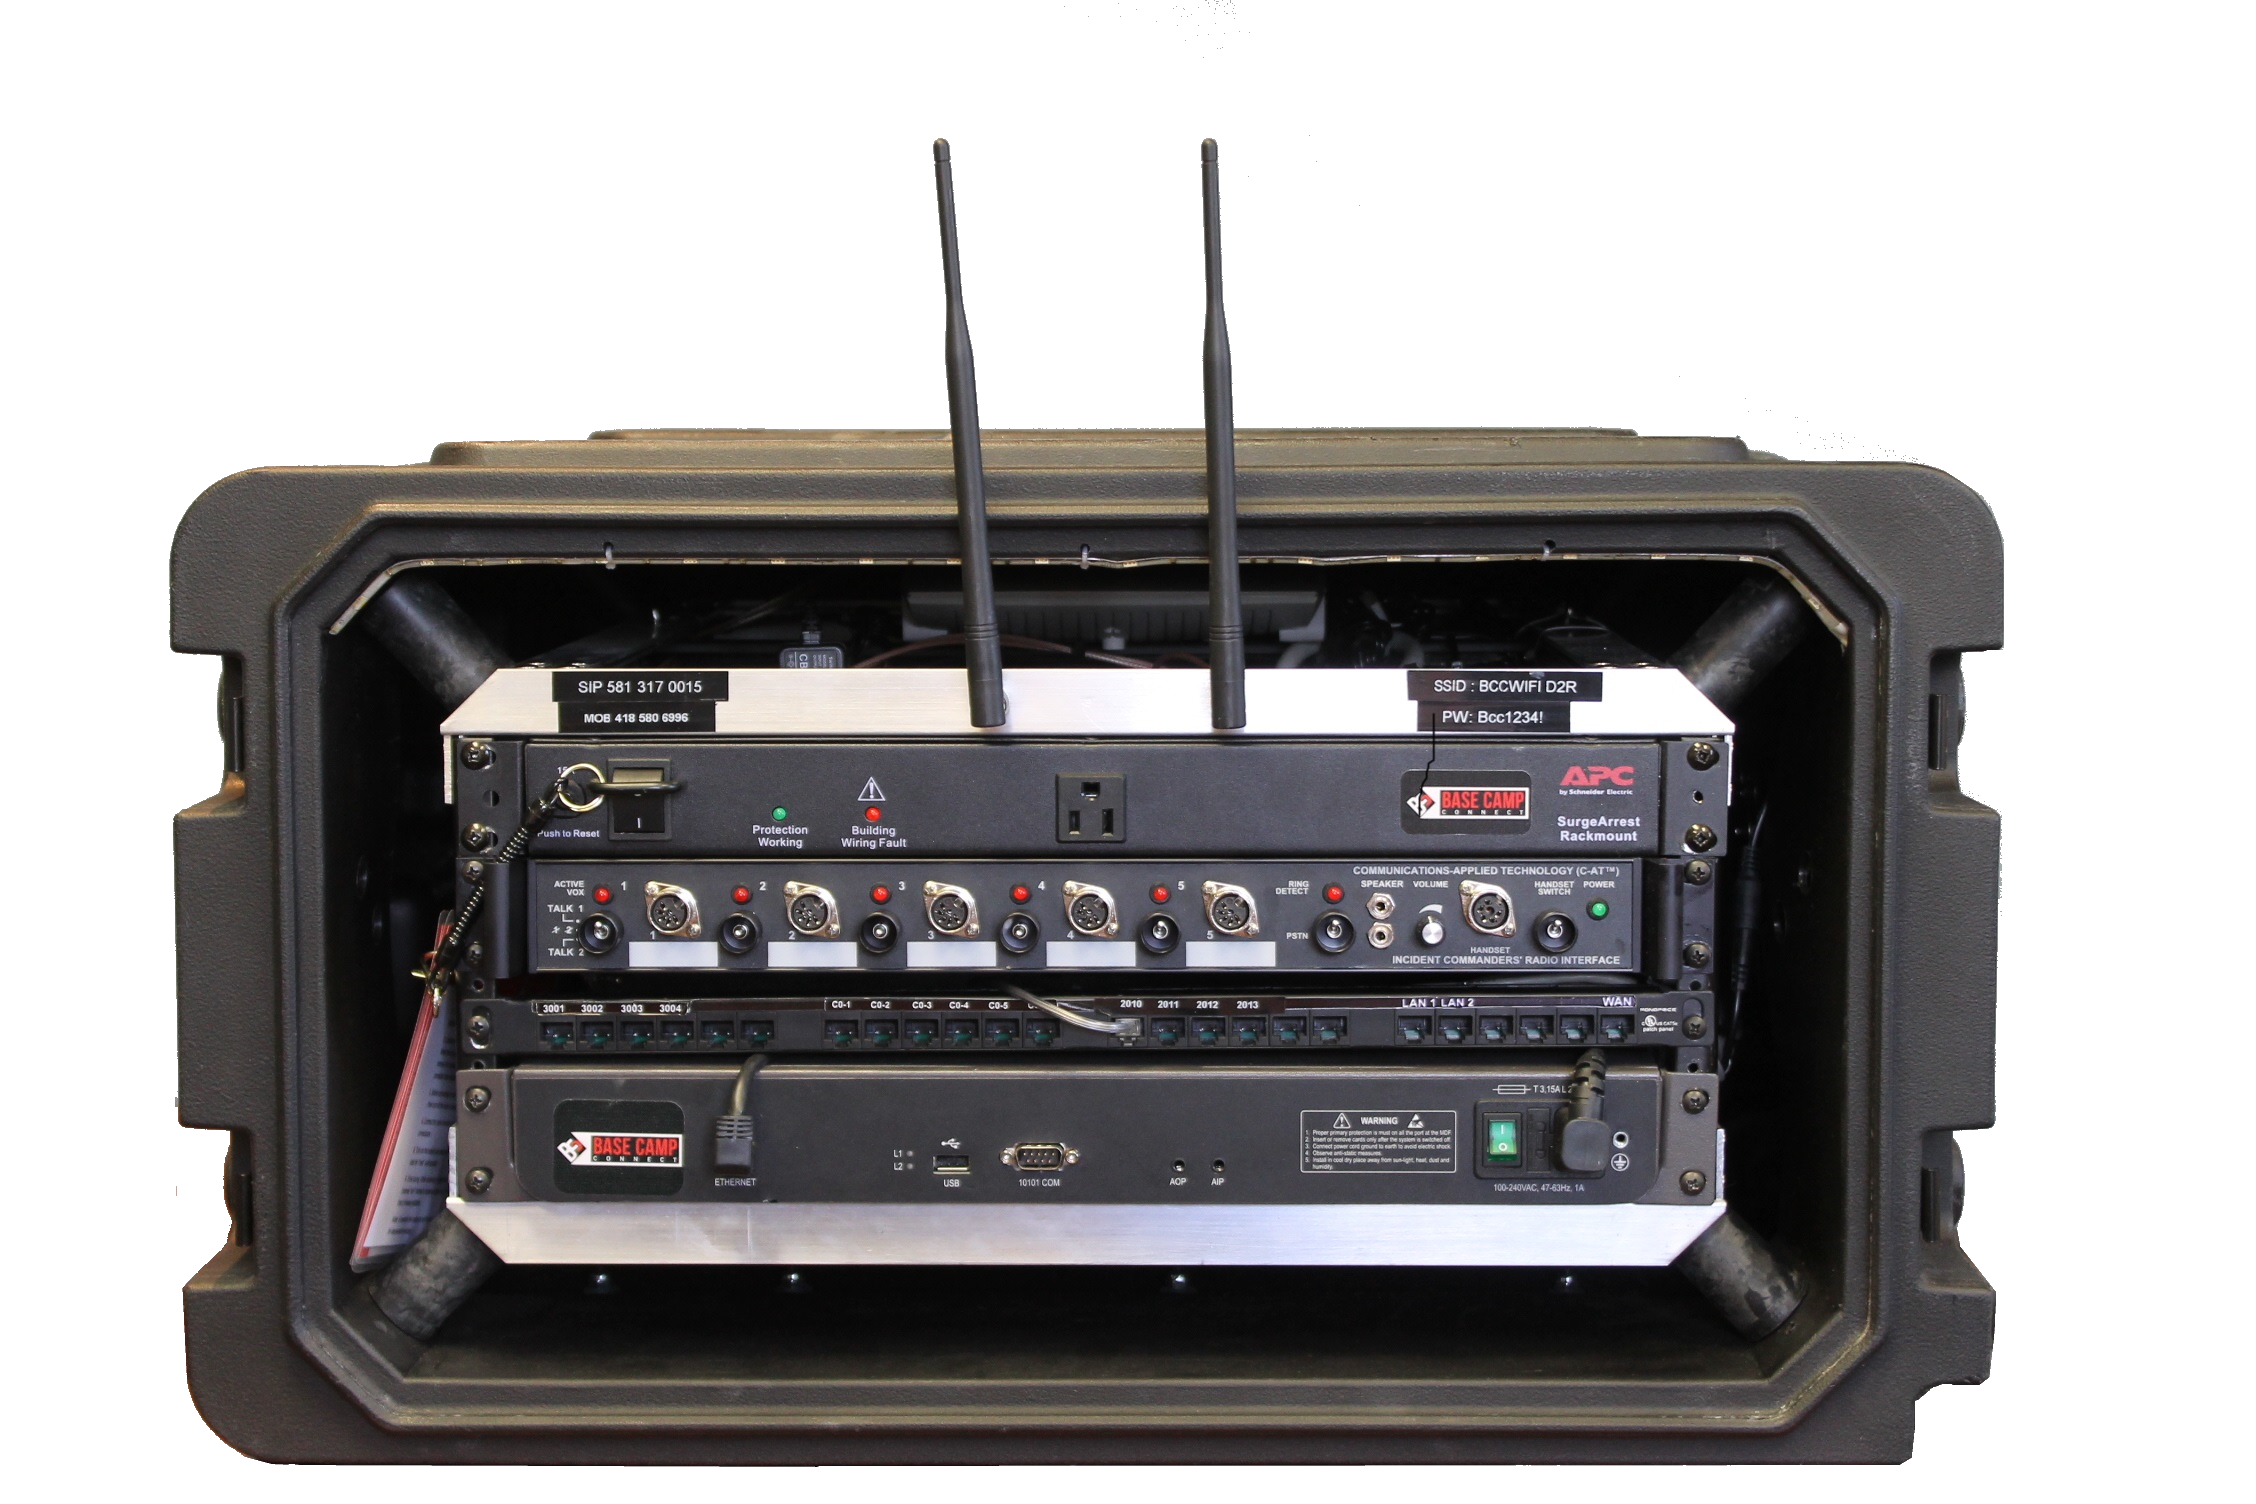 Public Safety Communication Systems - Voice, Data and Radio Interop.